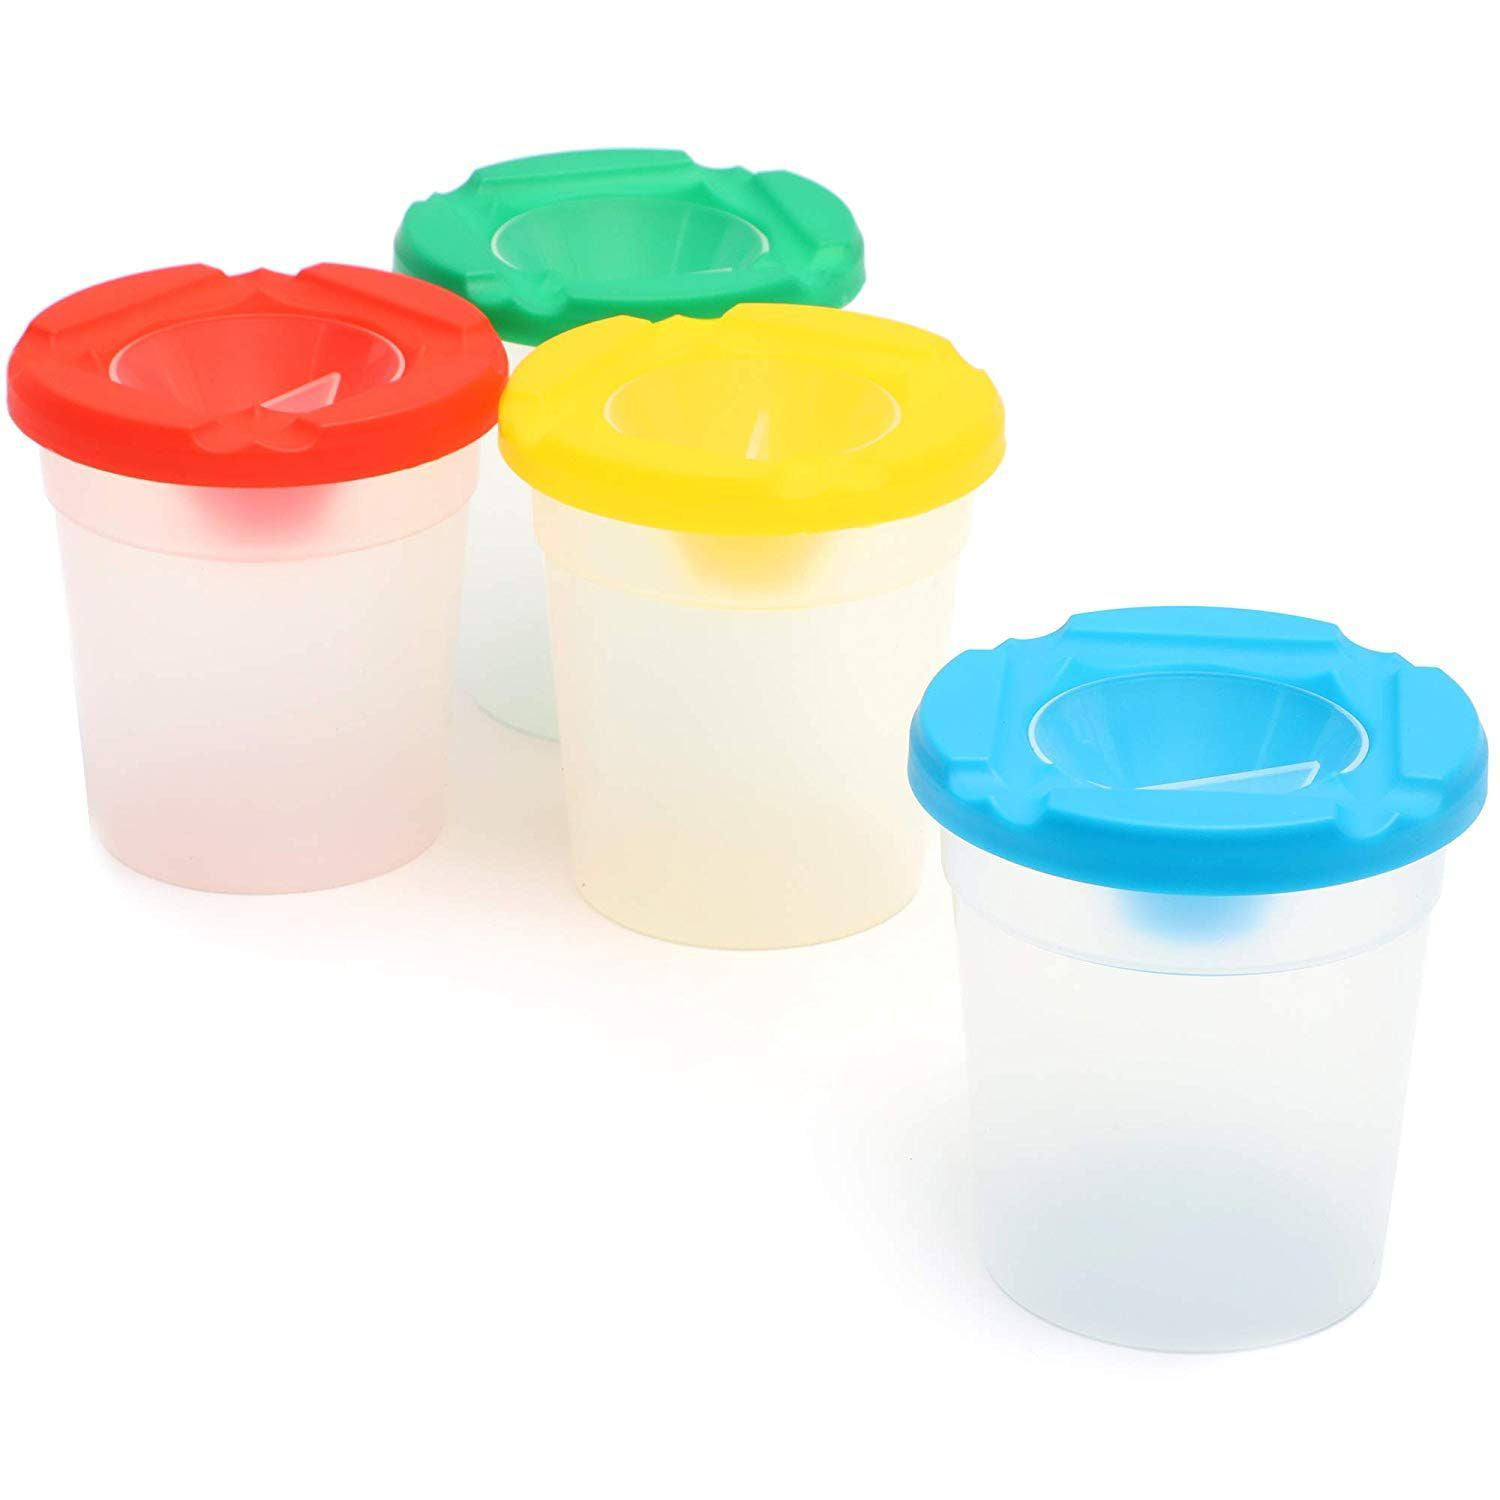 4 Assorted Colors Palette Cups School Classroom 2.4 Inches Tall Art Supply for Kids 12-Pack Spill Proof Paint Cups with Lids 2.75 Inches in Diameter No Spill Paint Cups